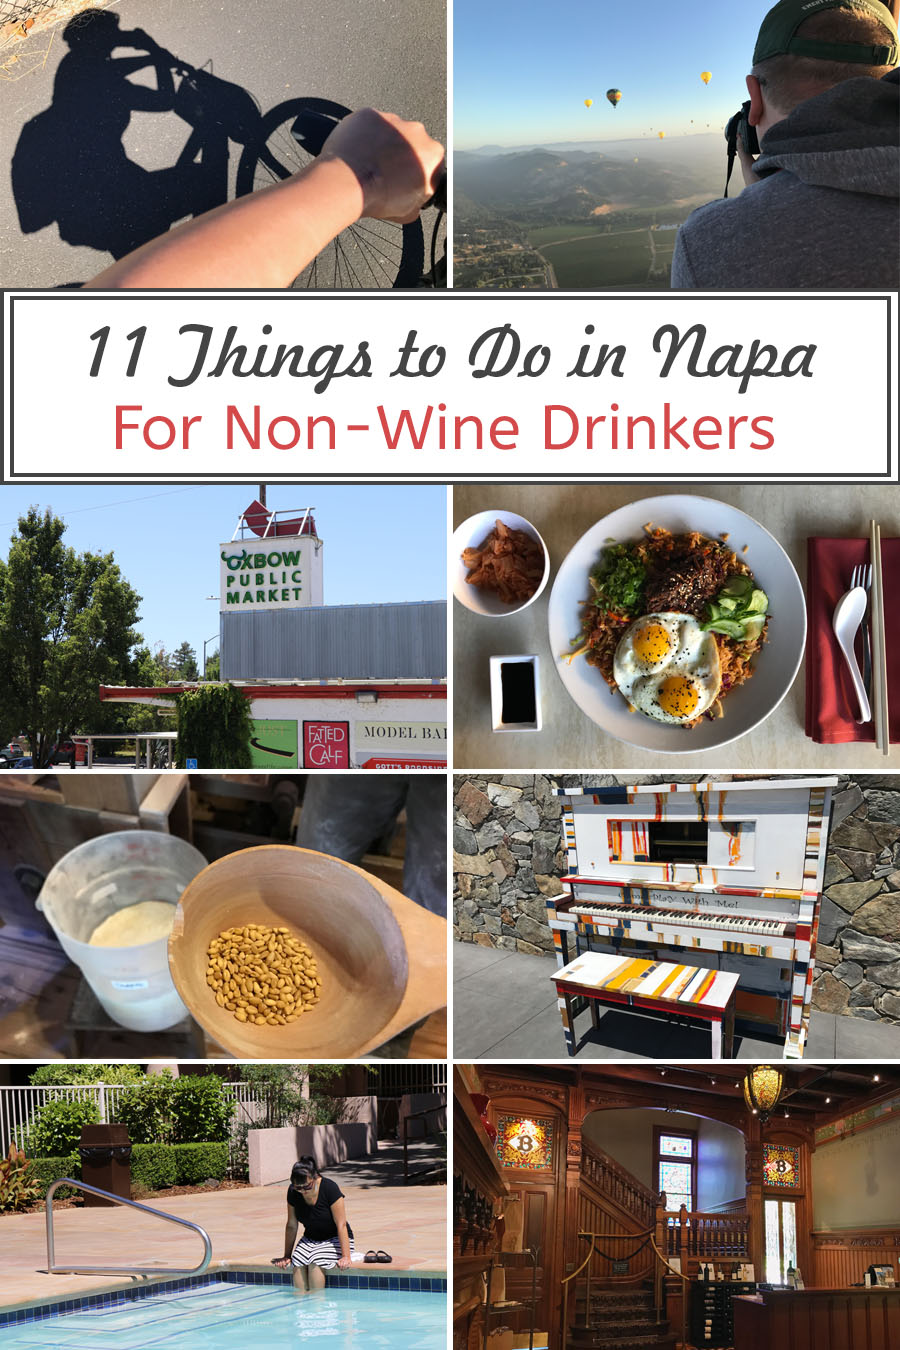 Cookies & Clogs | Travel tips: 11 Things to Do in Napa, CA that Don’t Involve Drinking Wine - Napa Non Wine Drinkers